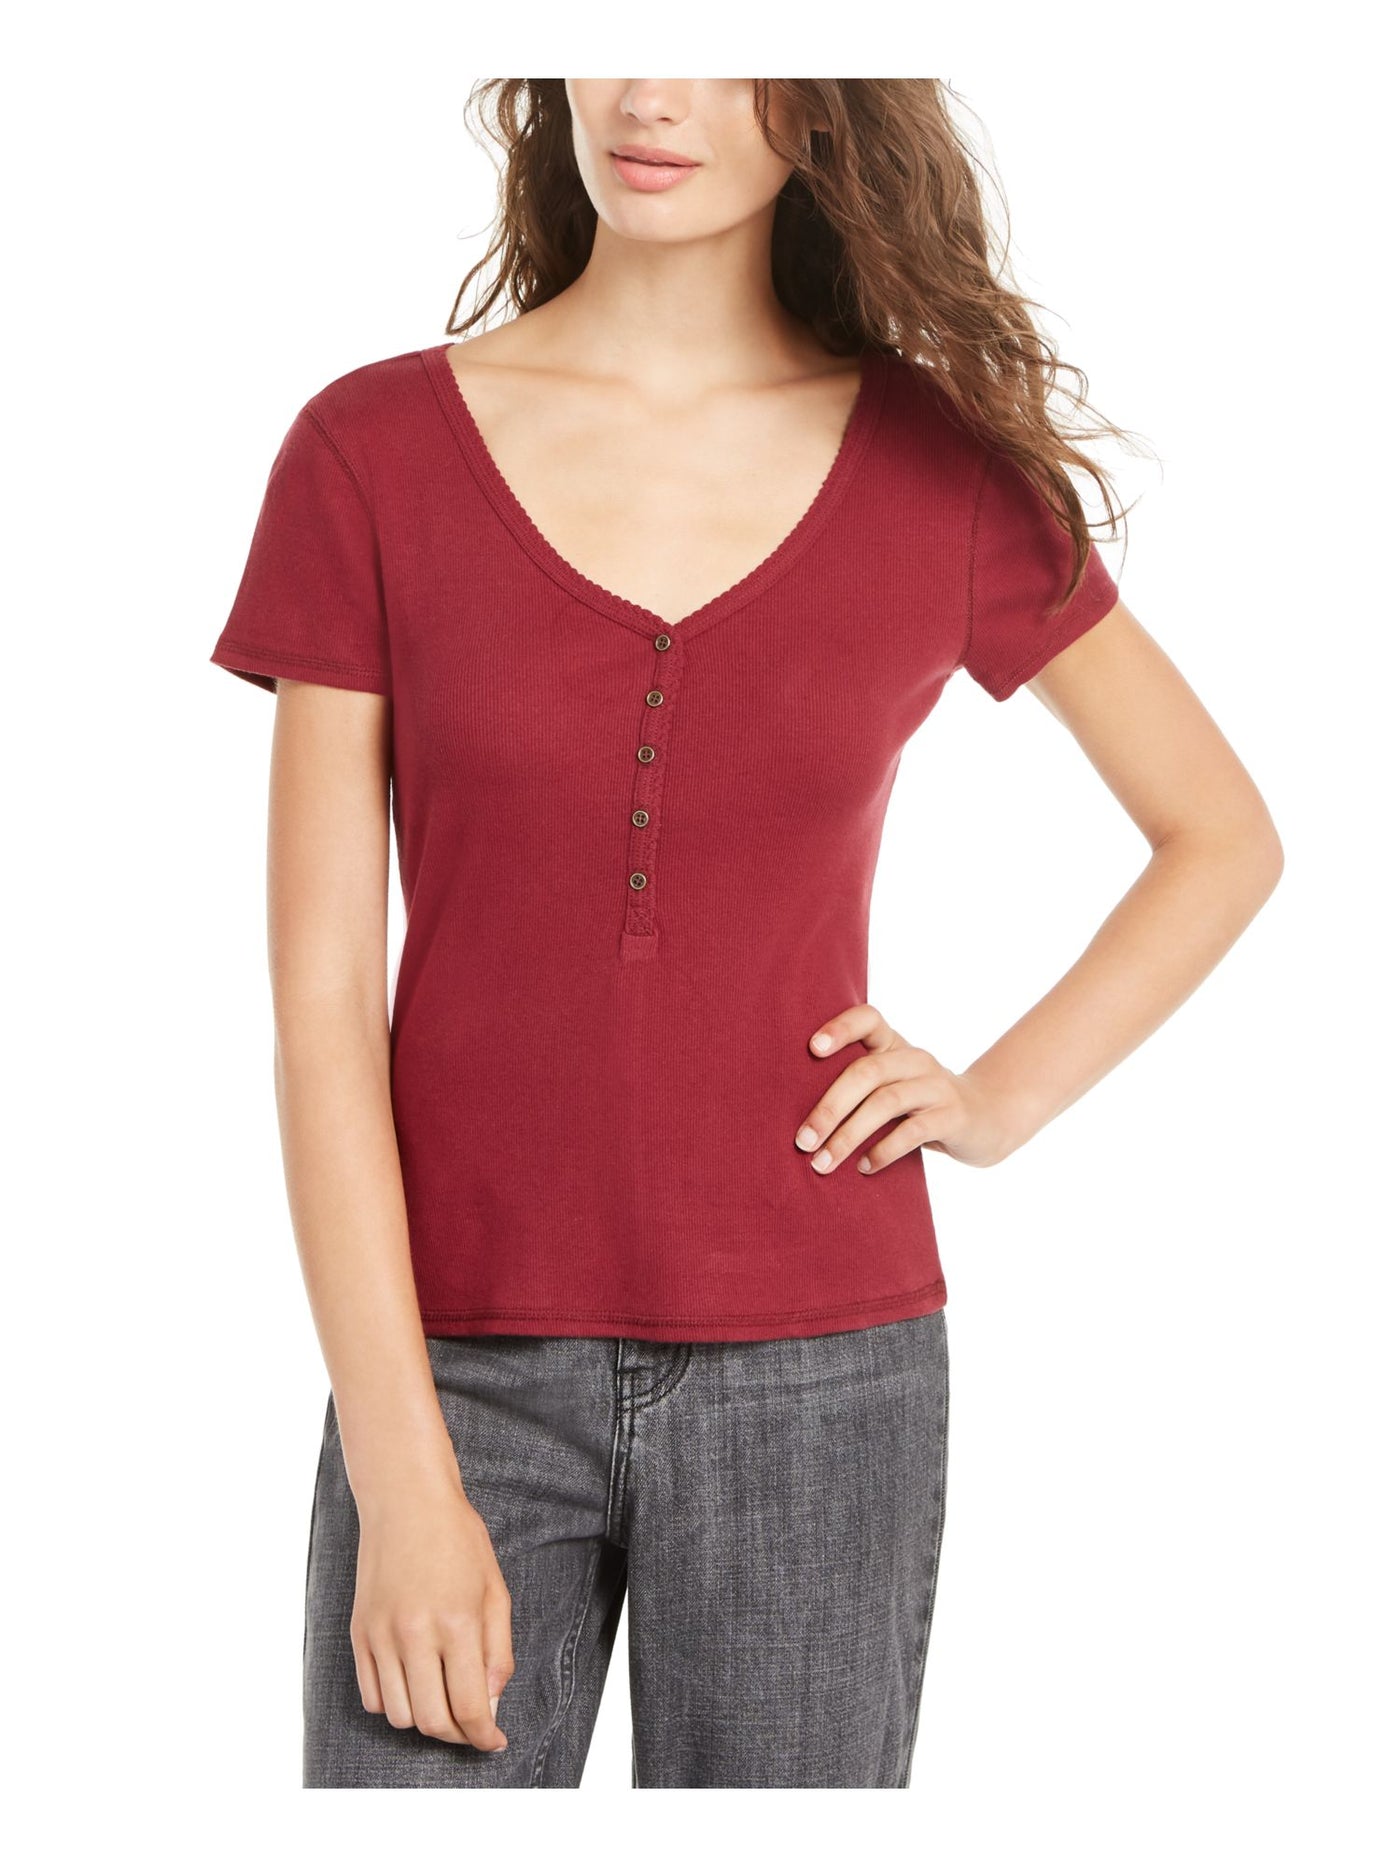 Common Stitch Womens Buttons Short Sleeve V Neck T-Shirt